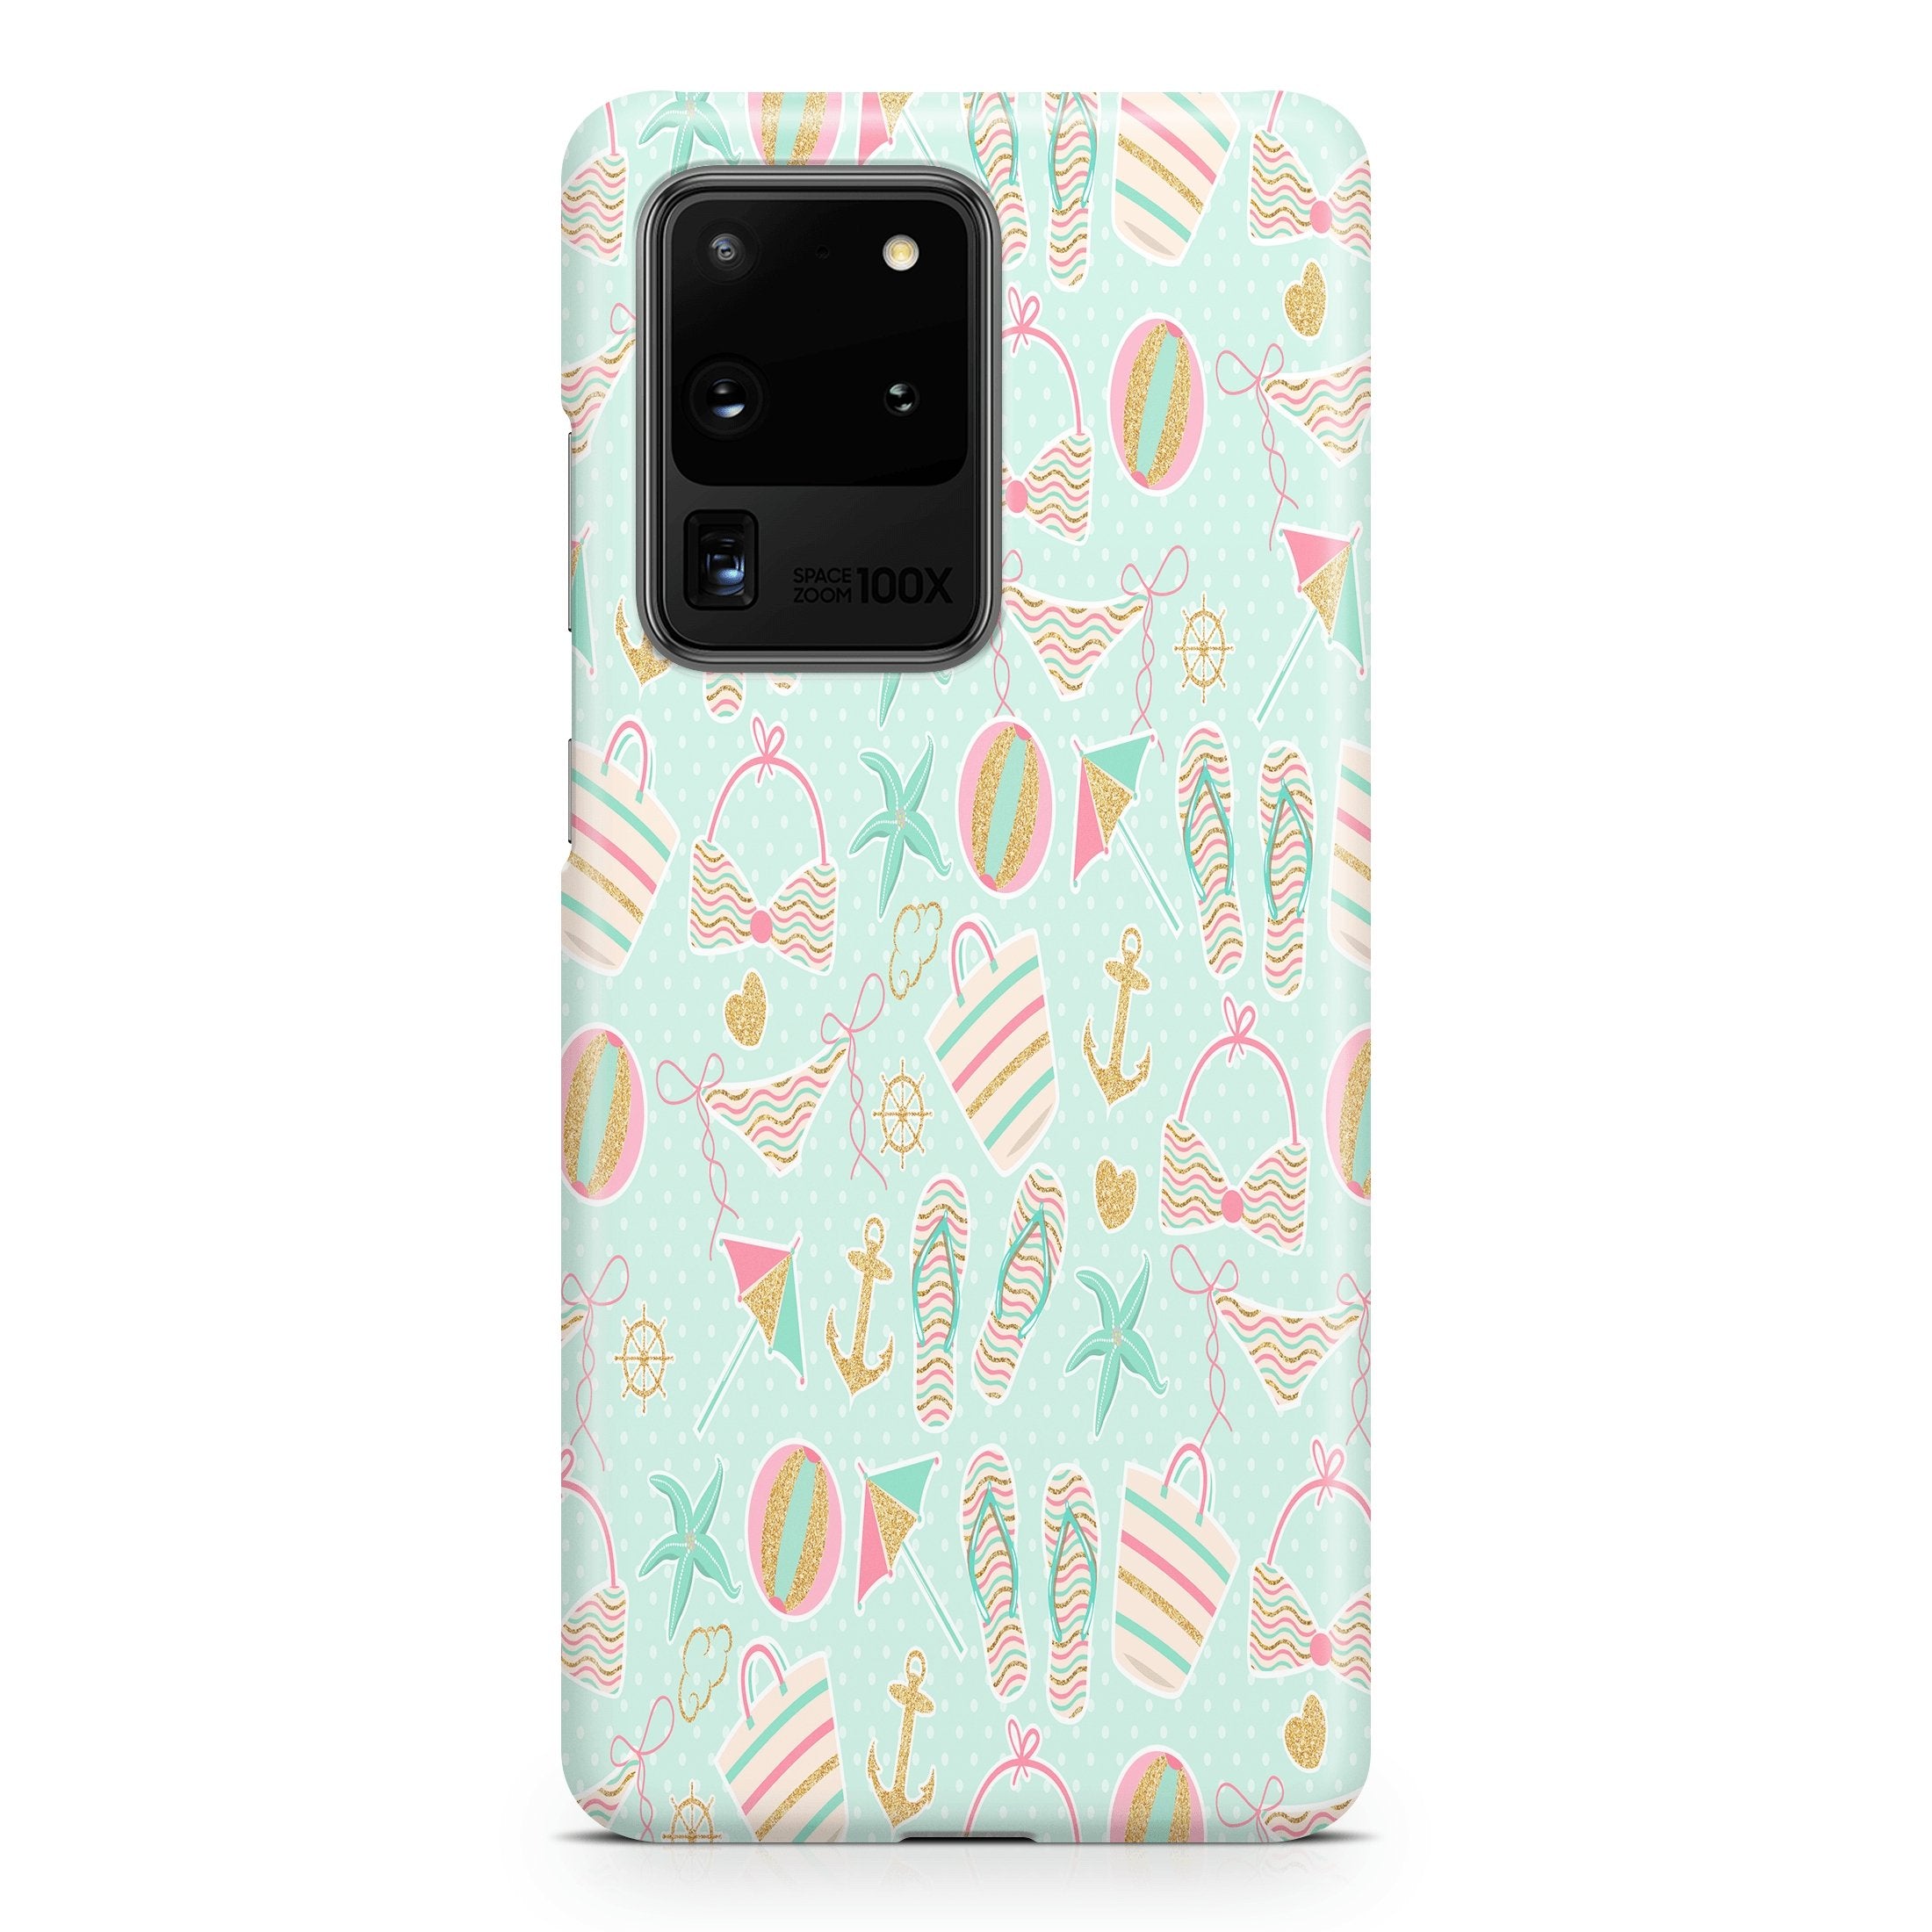 Beach Baby - Samsung phone case designs by CaseSwagger